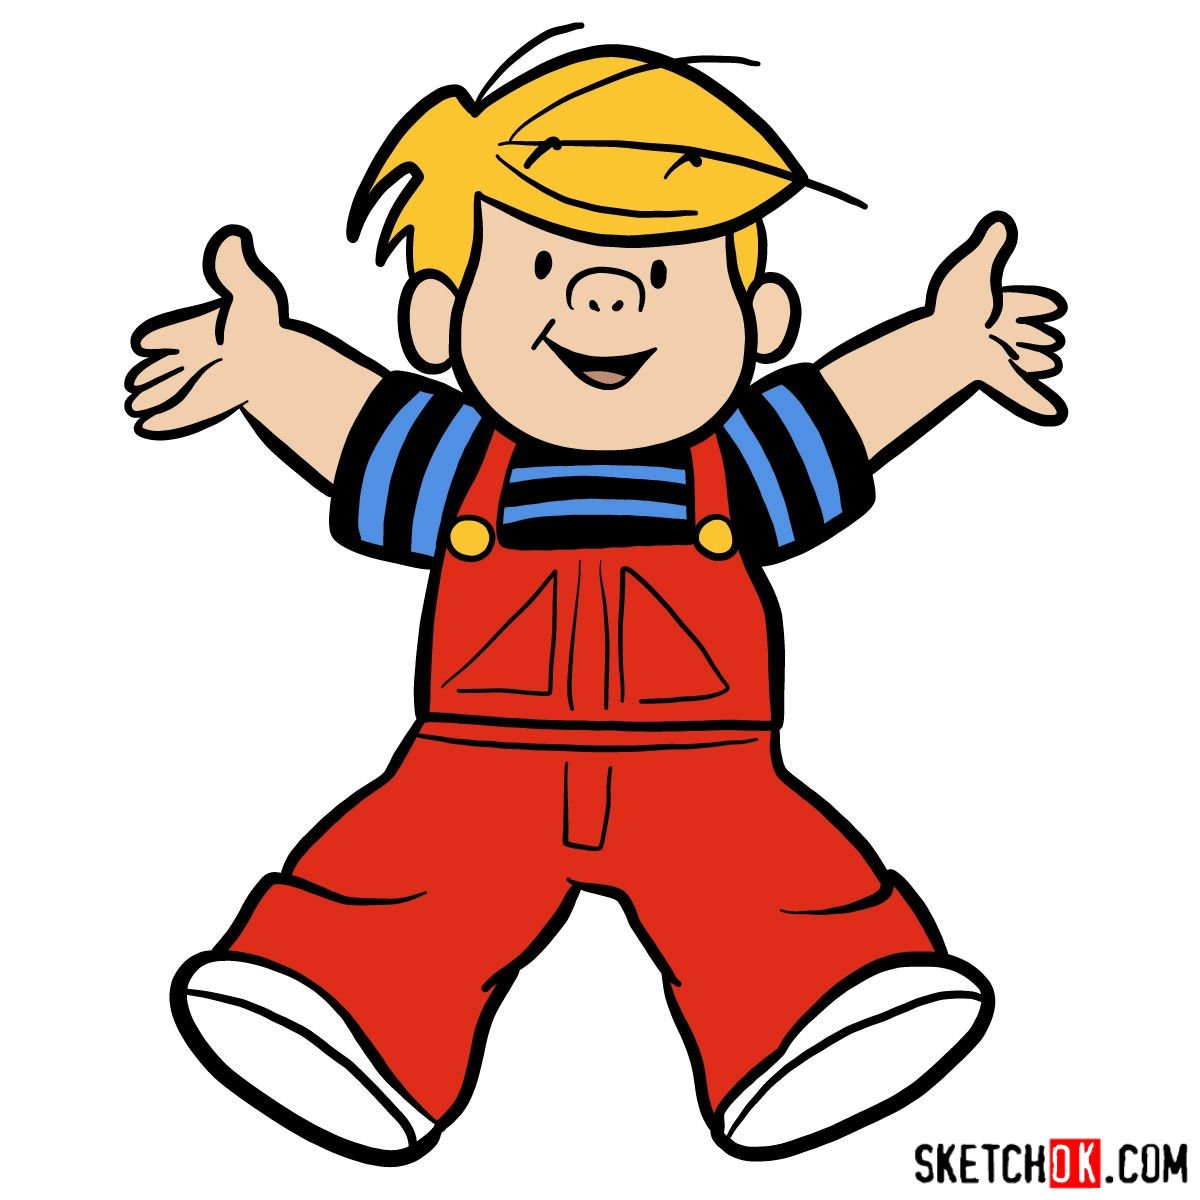 How to draw Dennis the Menace - Sketchok easy drawing guides